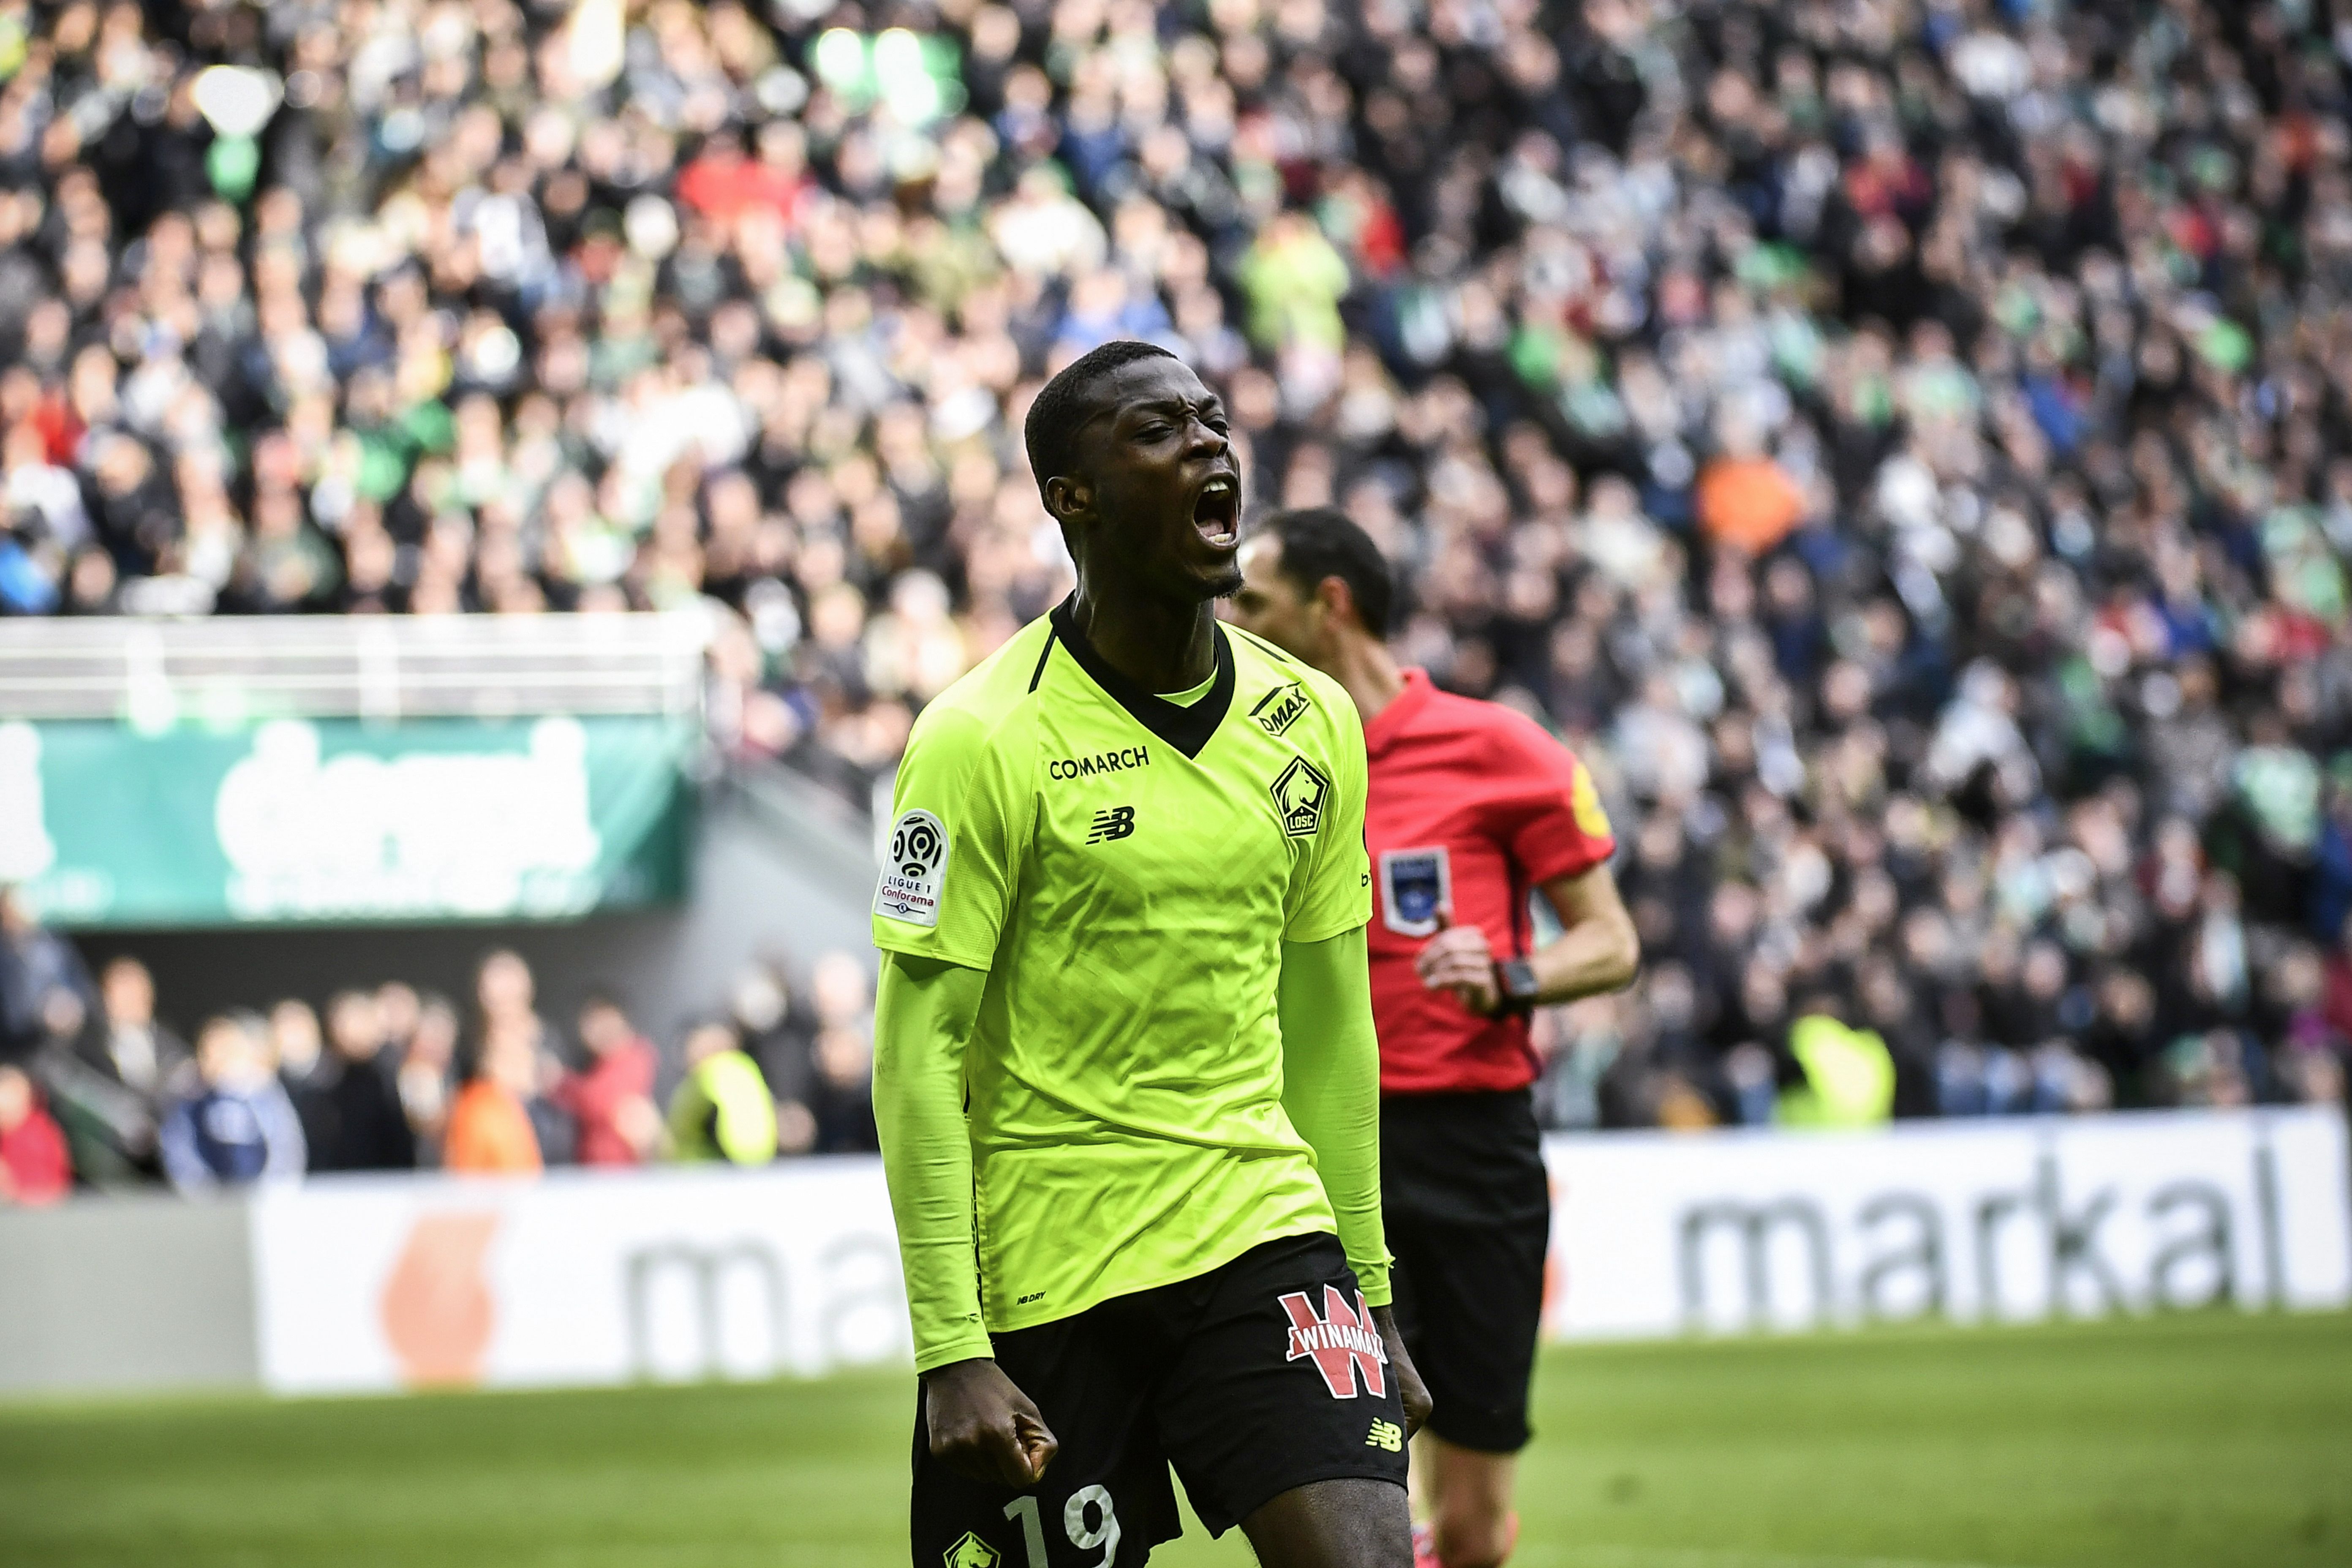 Lille's Ivorian forward Nicolas Pepe celebrates after scoring a goal during the L1 football match AS Saint-Etienne (ASSE) vs Lille (LOSC) on March 10, 2019, at the Geoffroy Guichard Stadium in Saint-Etienne, central France. (Photo by JEFF PACHOUD / AFP)        (Photo credit should read JEFF PACHOUD/AFP/Getty Images)